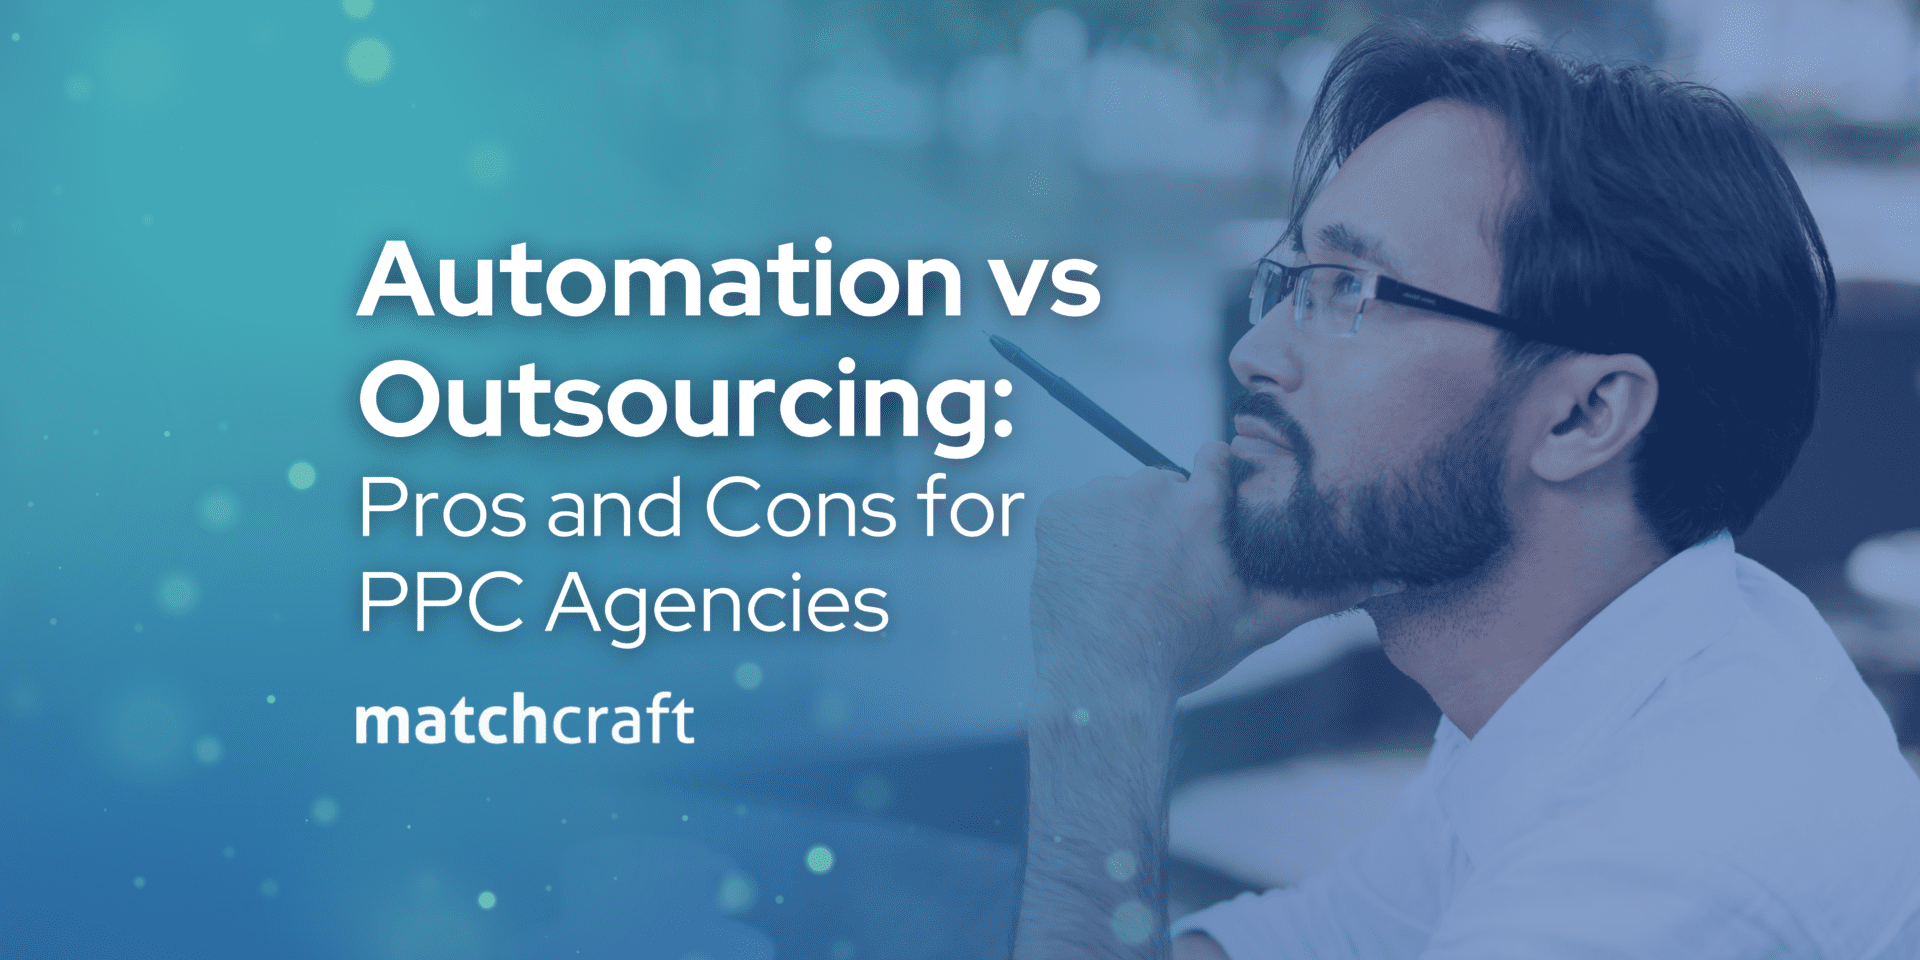 Automation VS Outsourcing: Pros and Cons for PPC Agencies